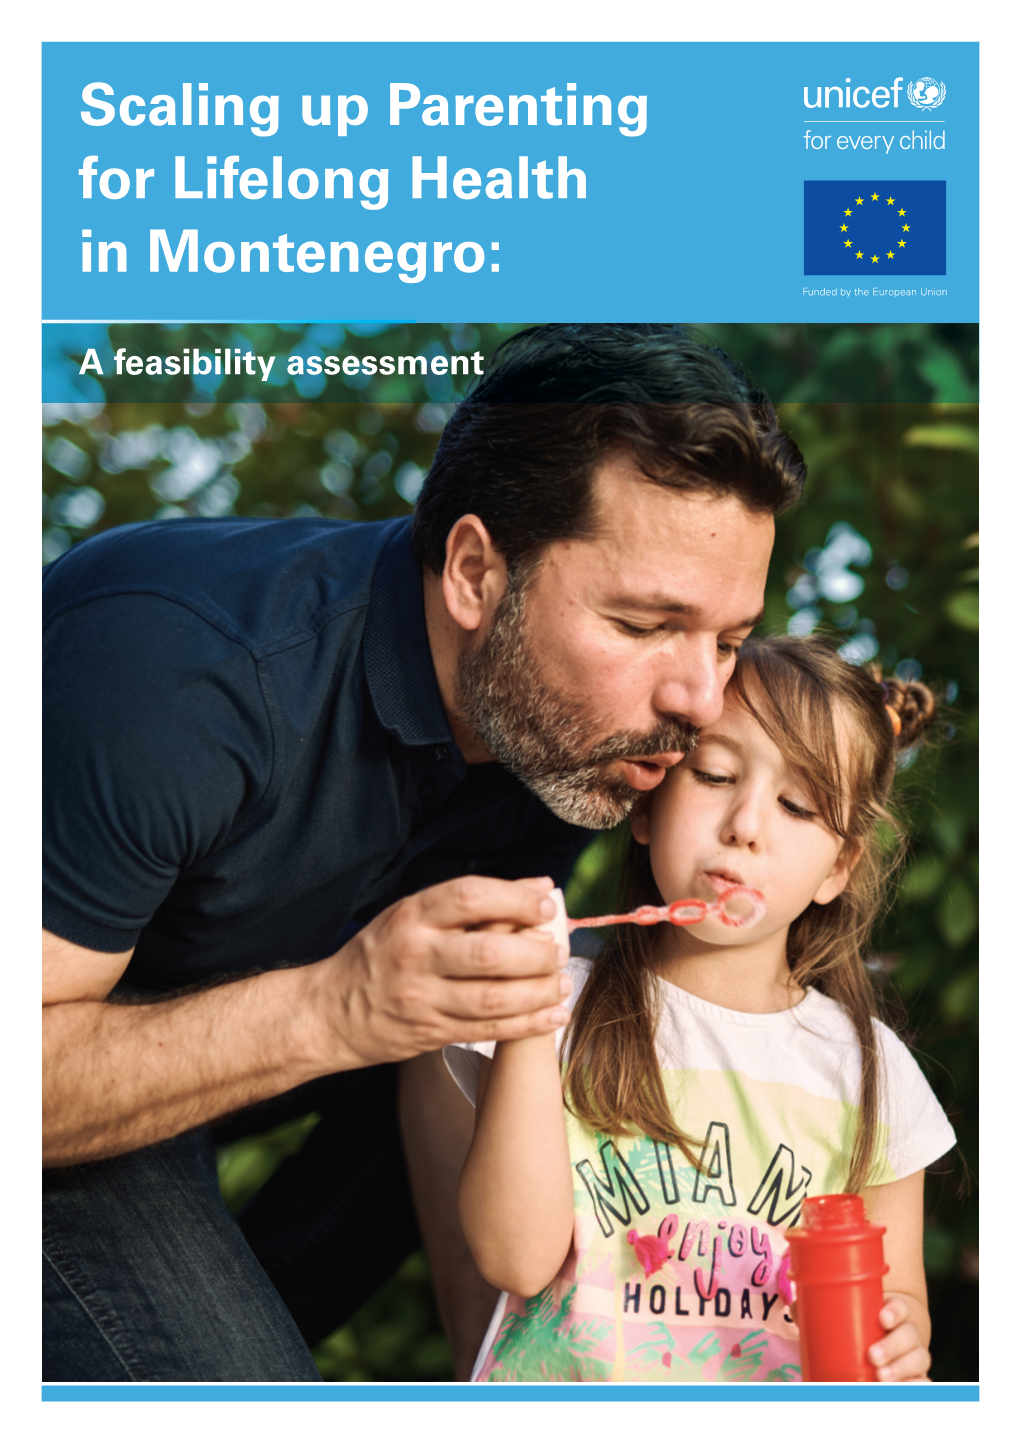 Scaling up Parenting for Lifelong Health in Montenegro: Funded by the European Union